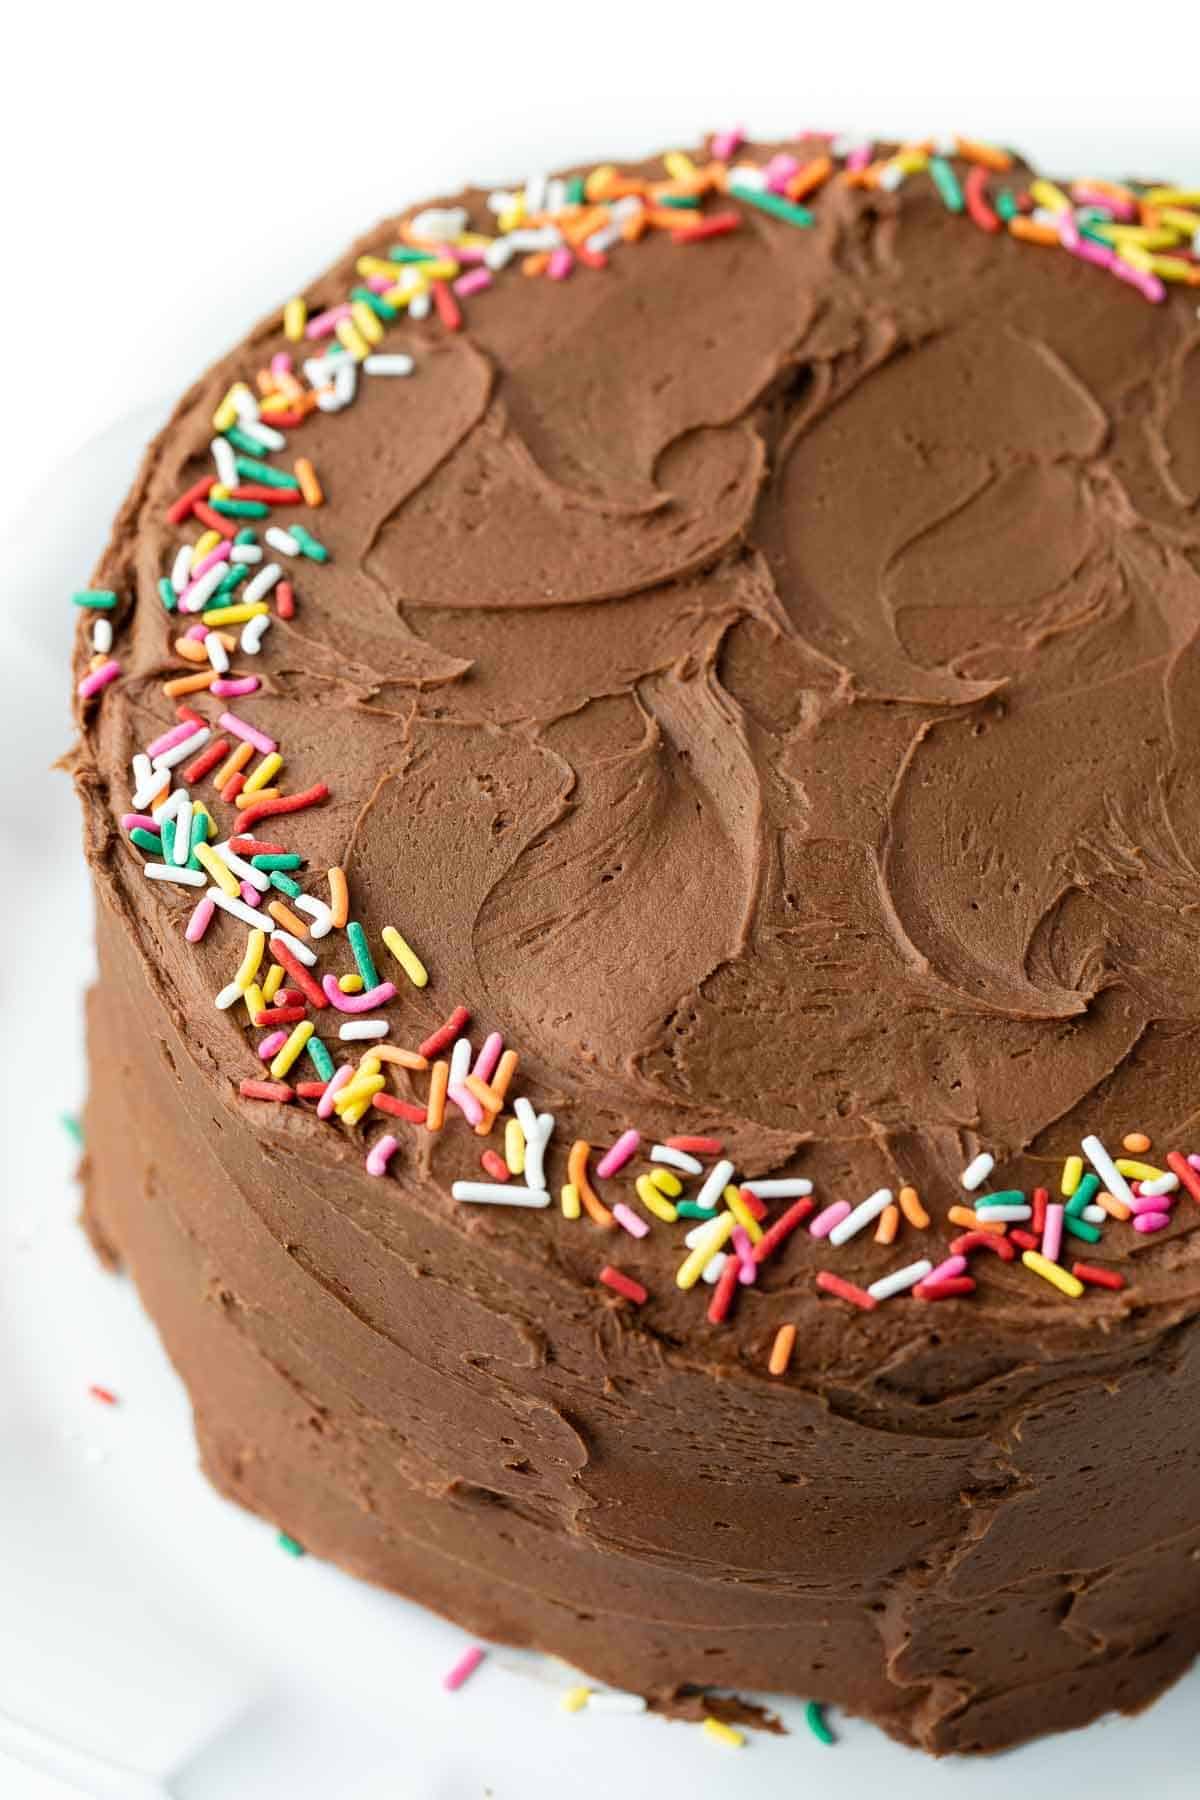 Round, layered birthday cake with chocolate frosting and a ring of colored sprinkles